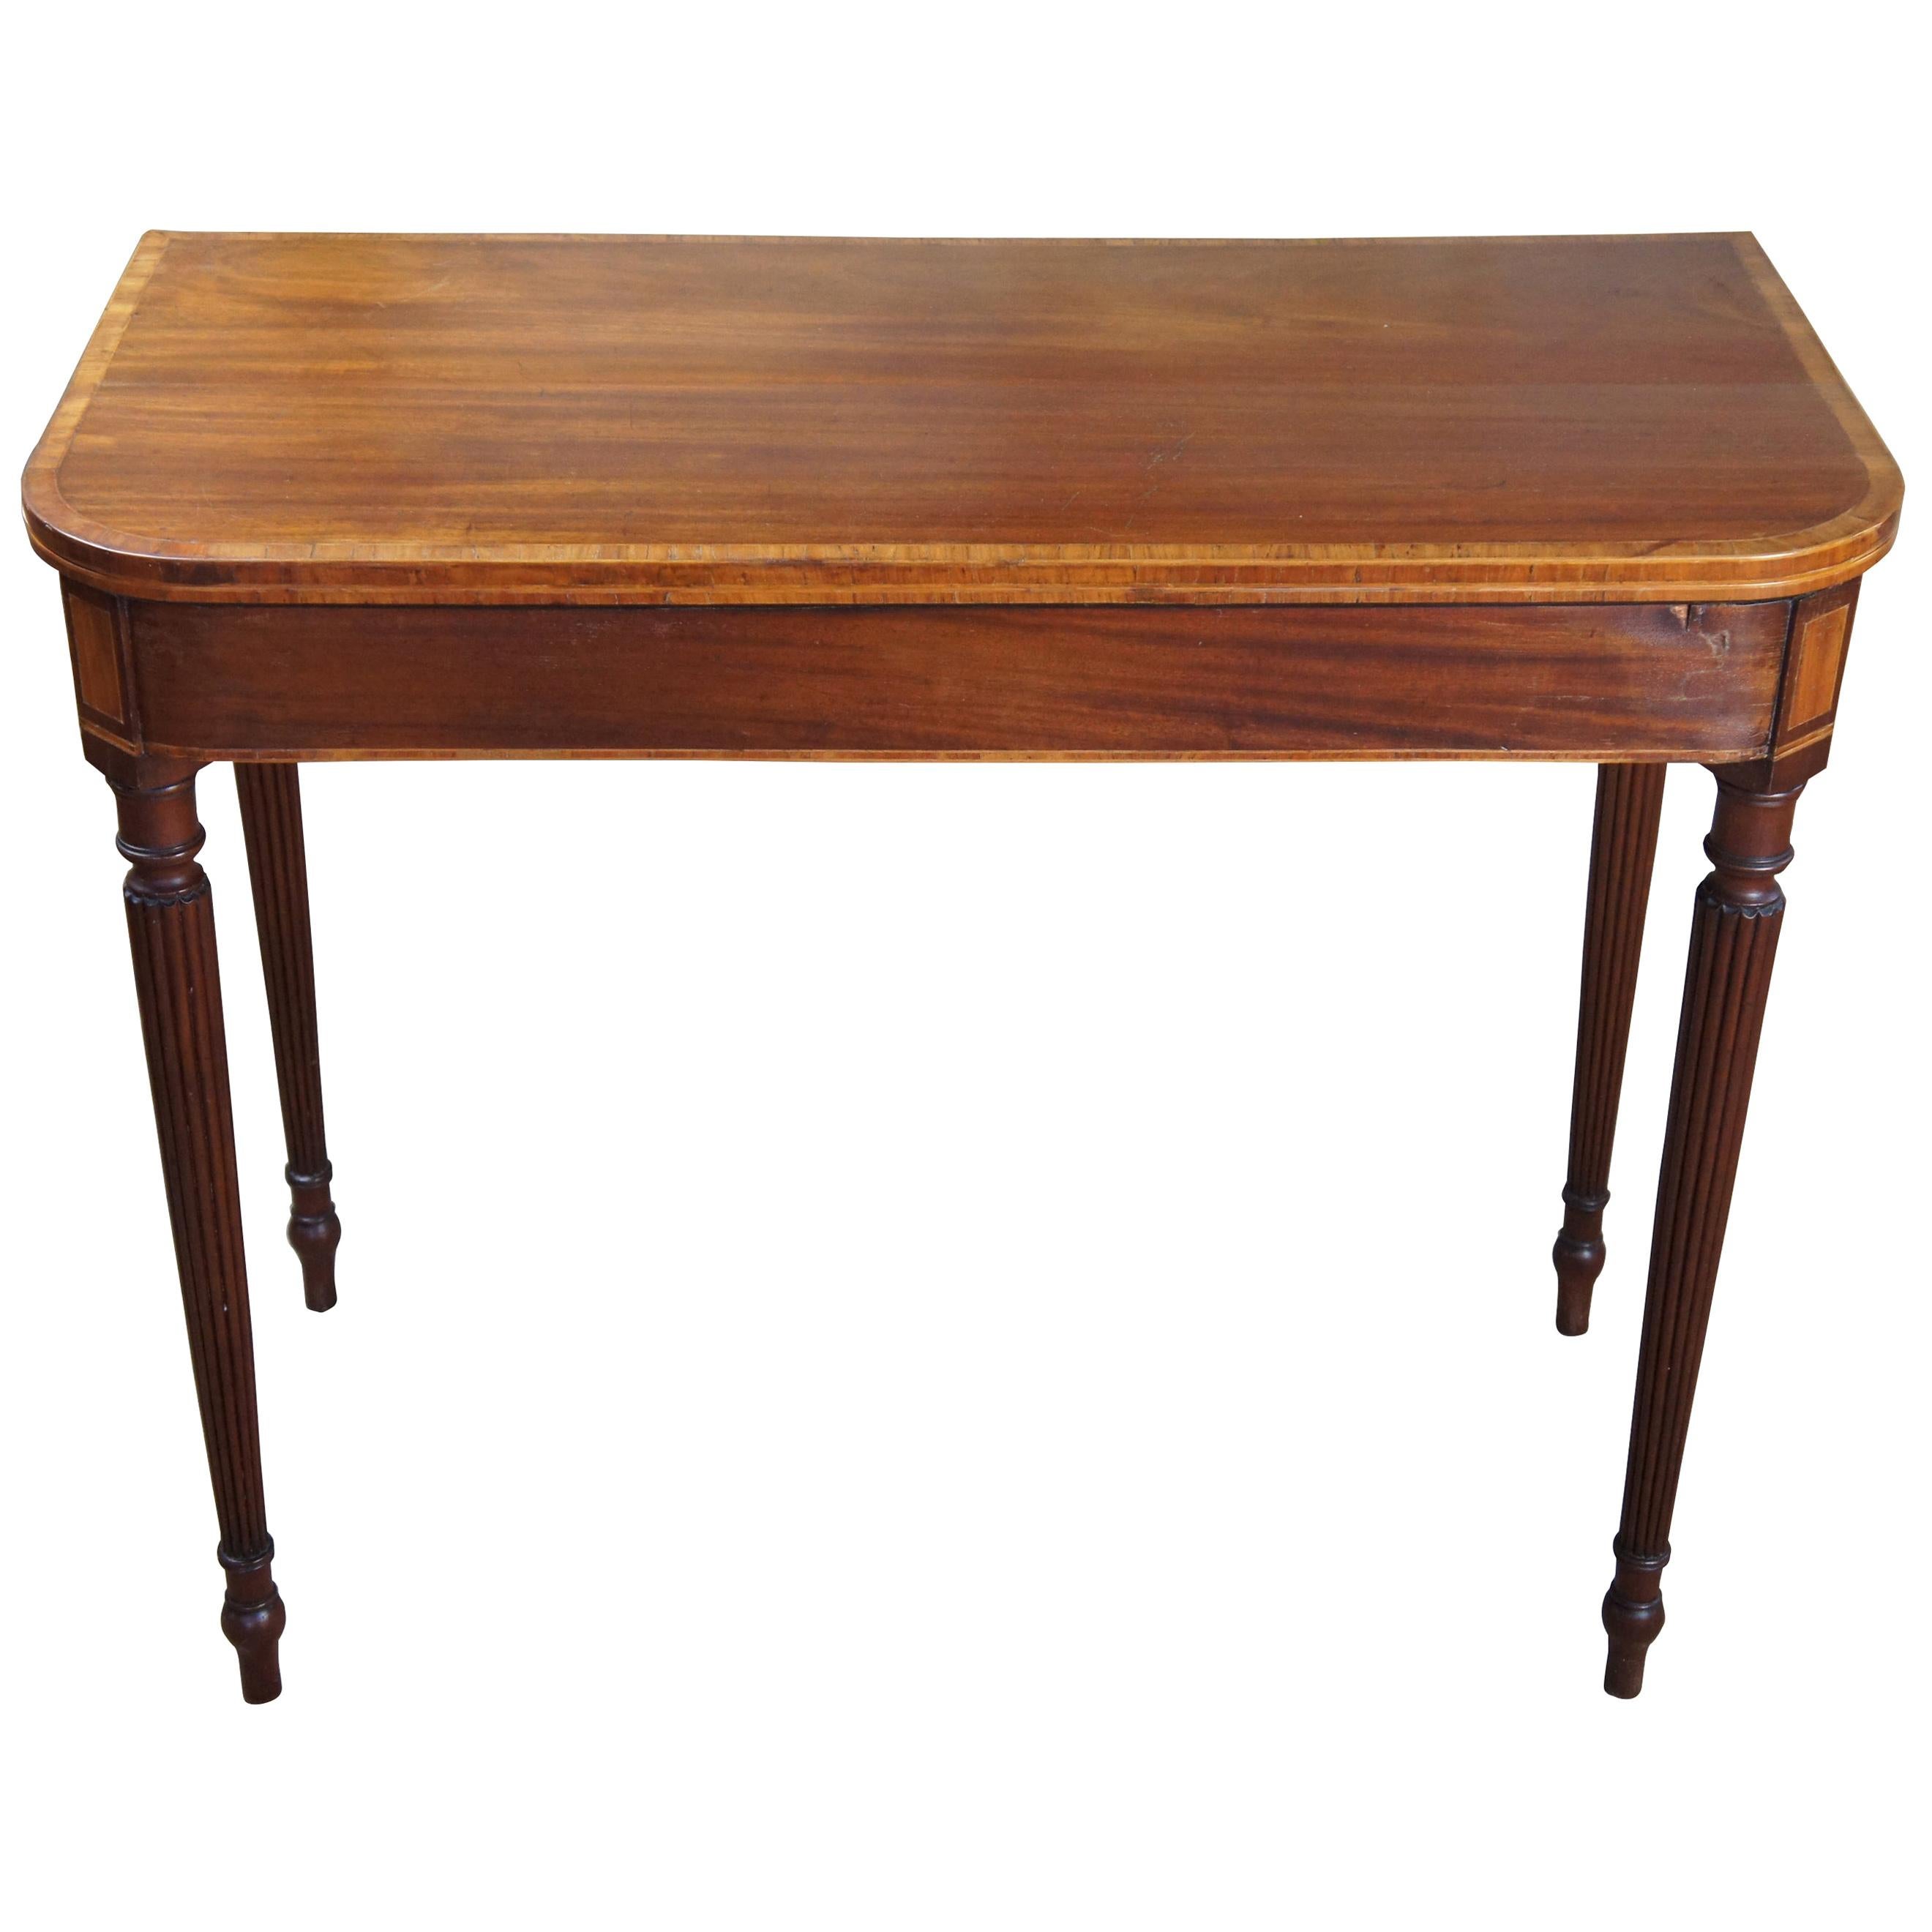 Early 19th Century American Mahogany Sheraton Console Game Table Hall Entryway